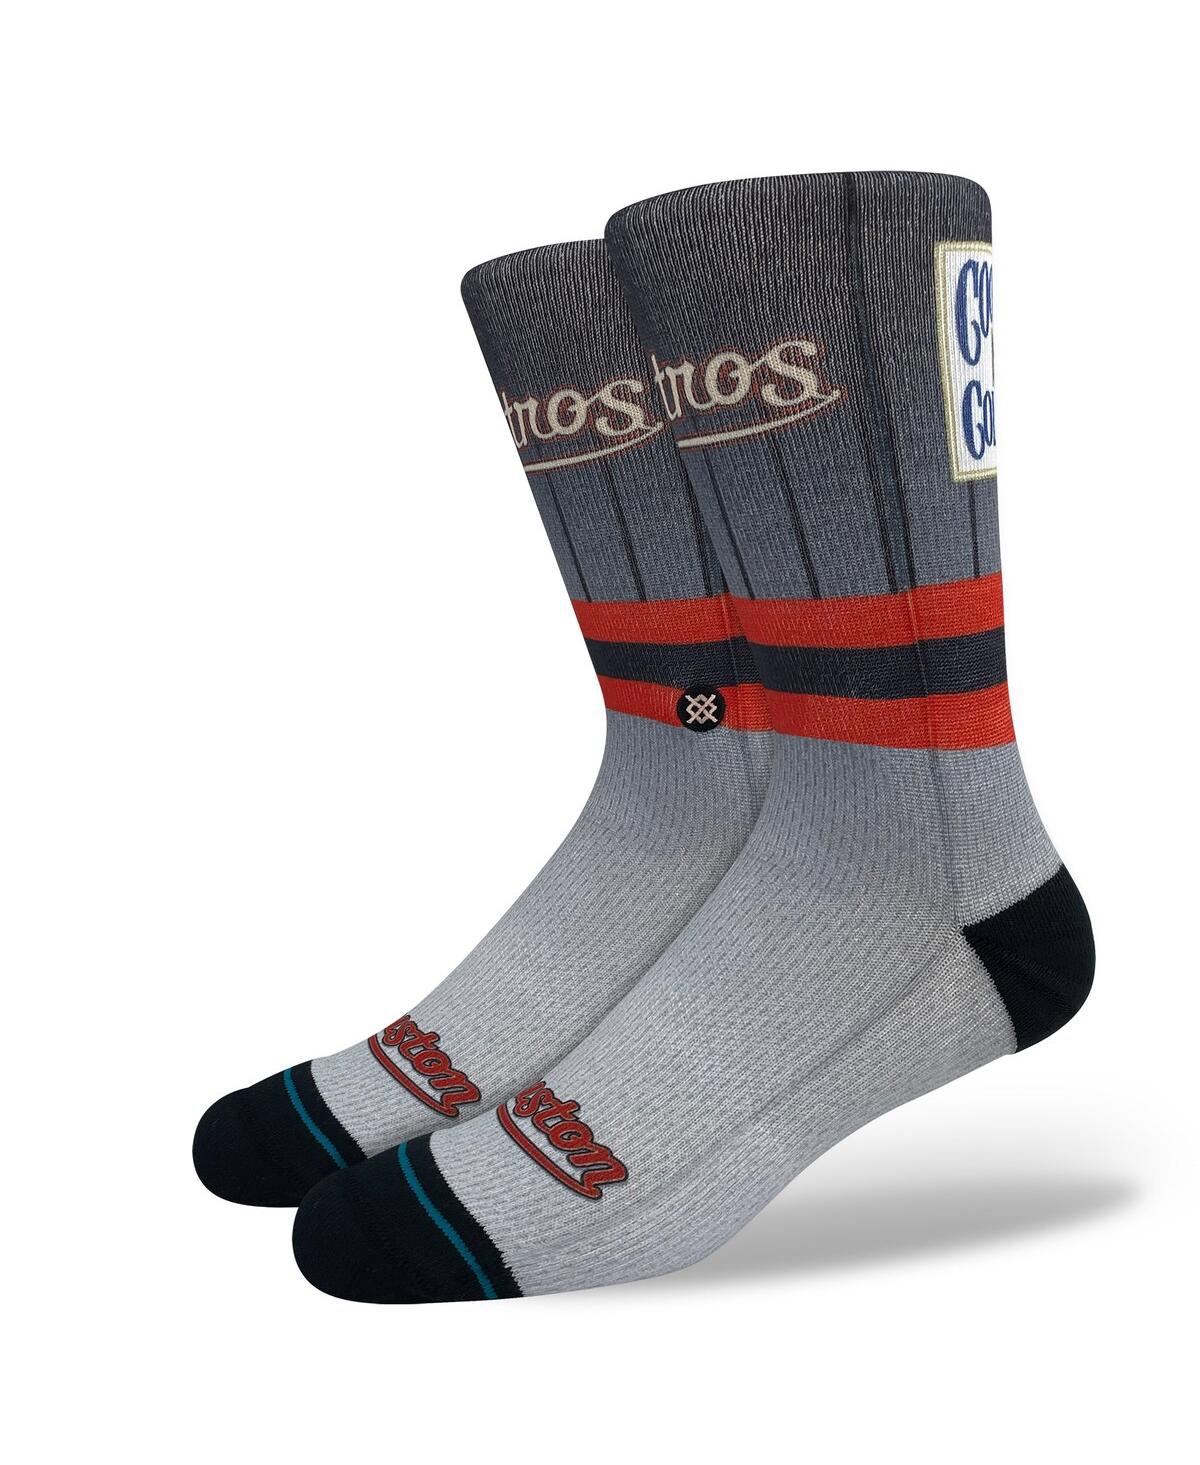 Men's Stance Houston Astros Cooperstown Collection Crew Socks - Gray